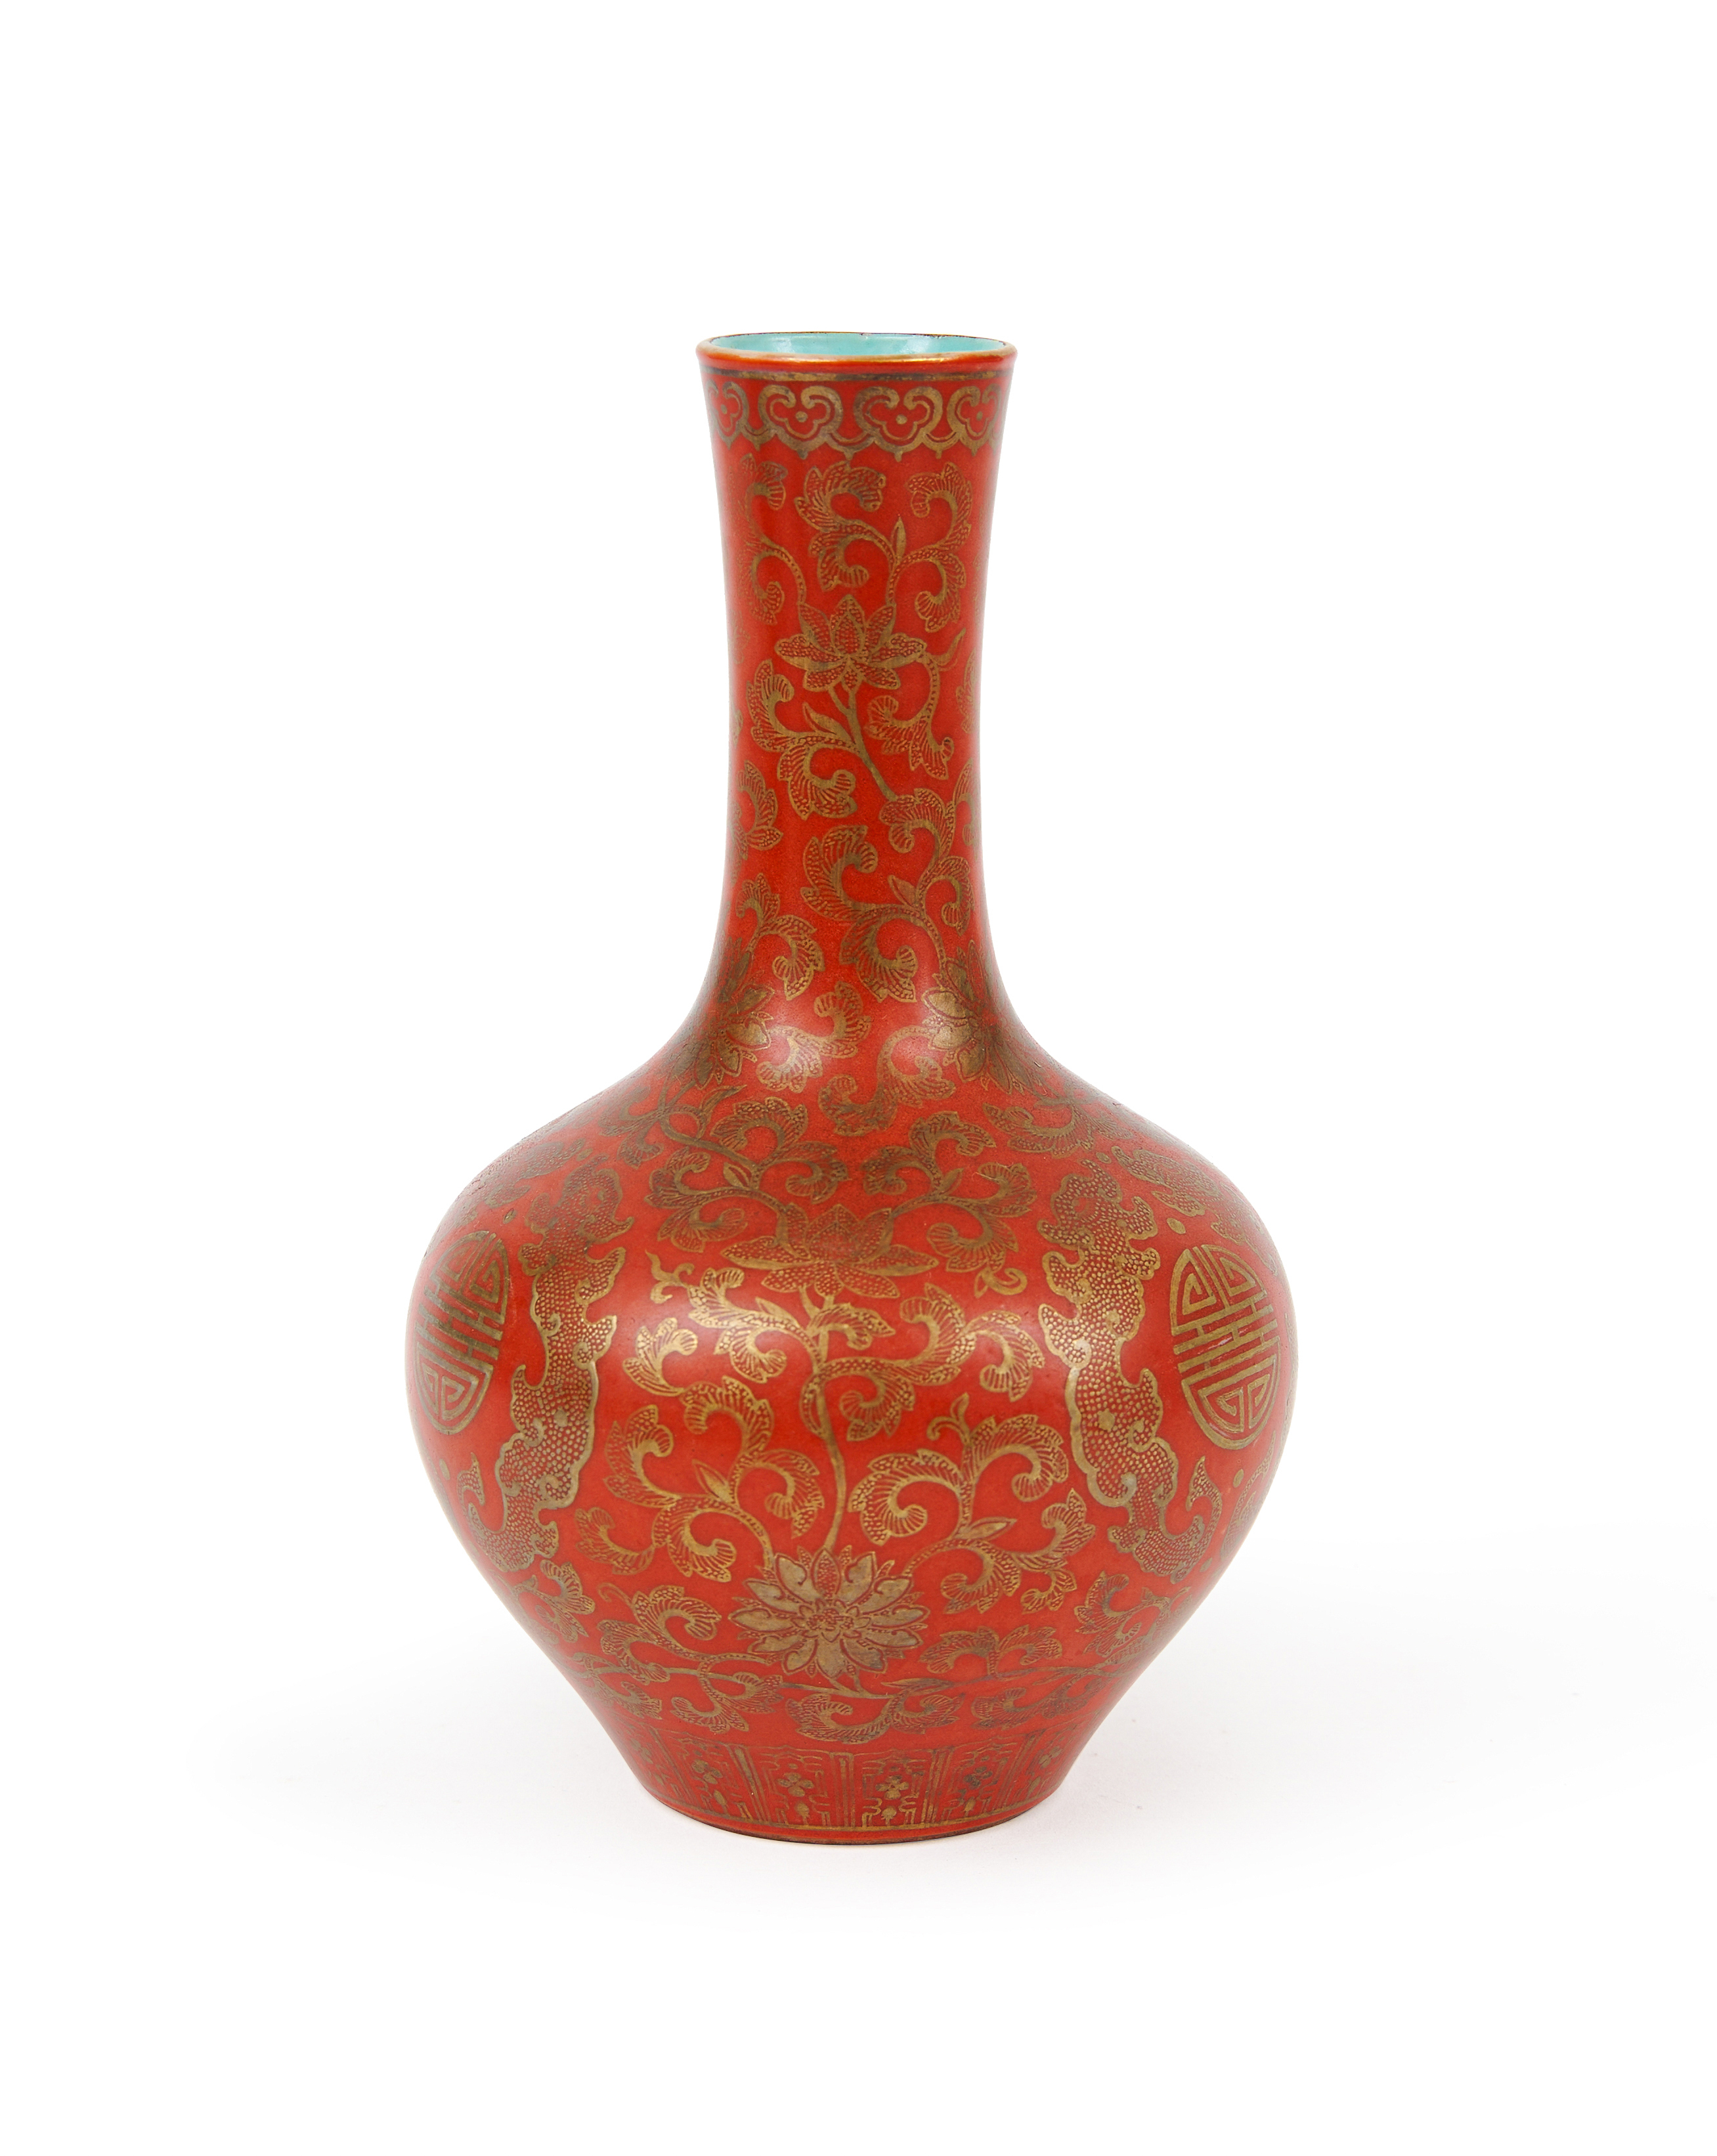 A GILT-DECORATED CORAL-GROUND BOTTLE VASE, QING DYNASTY (1644-1911) - Image 2 of 5